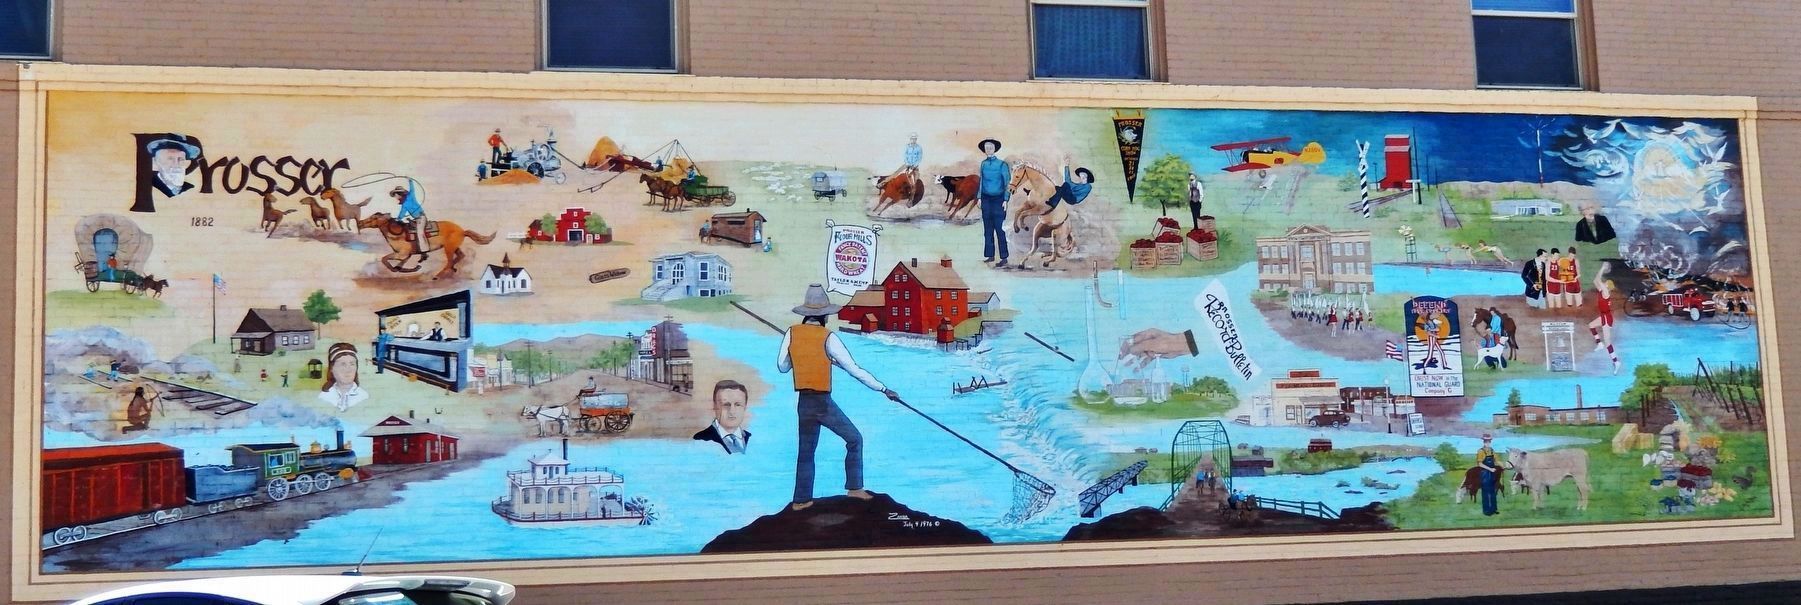 Prosser Bicentennial Mural (<i>north side of Golden Rule Store building; facing Meade Avenue</i>) image. Click for full size.